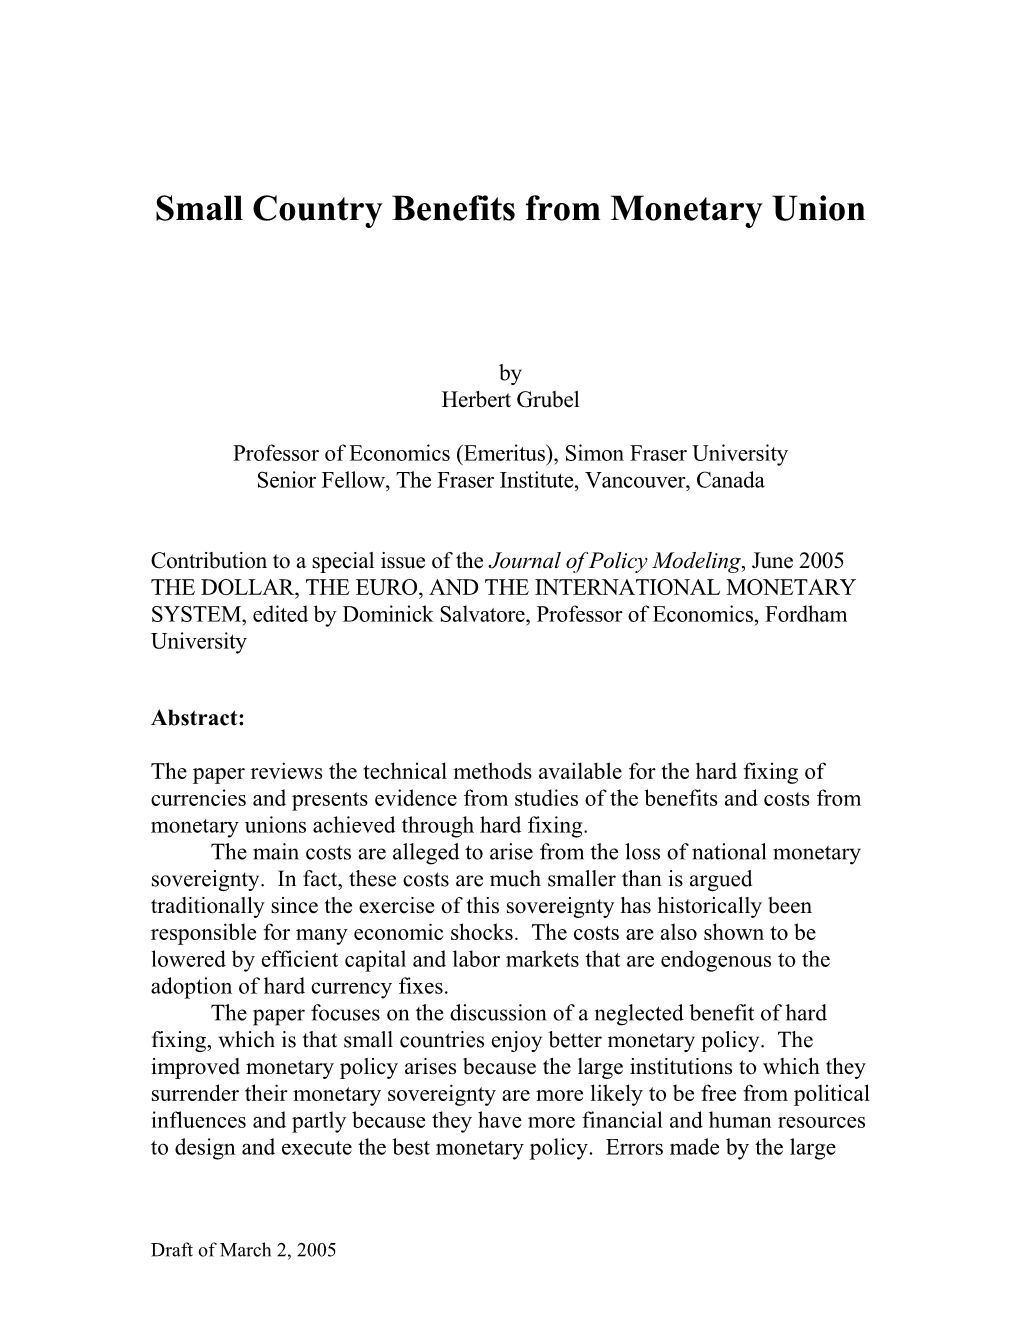 The Purpose of This Paper Is to Point to Three Economic Benefits That Are Neglected In